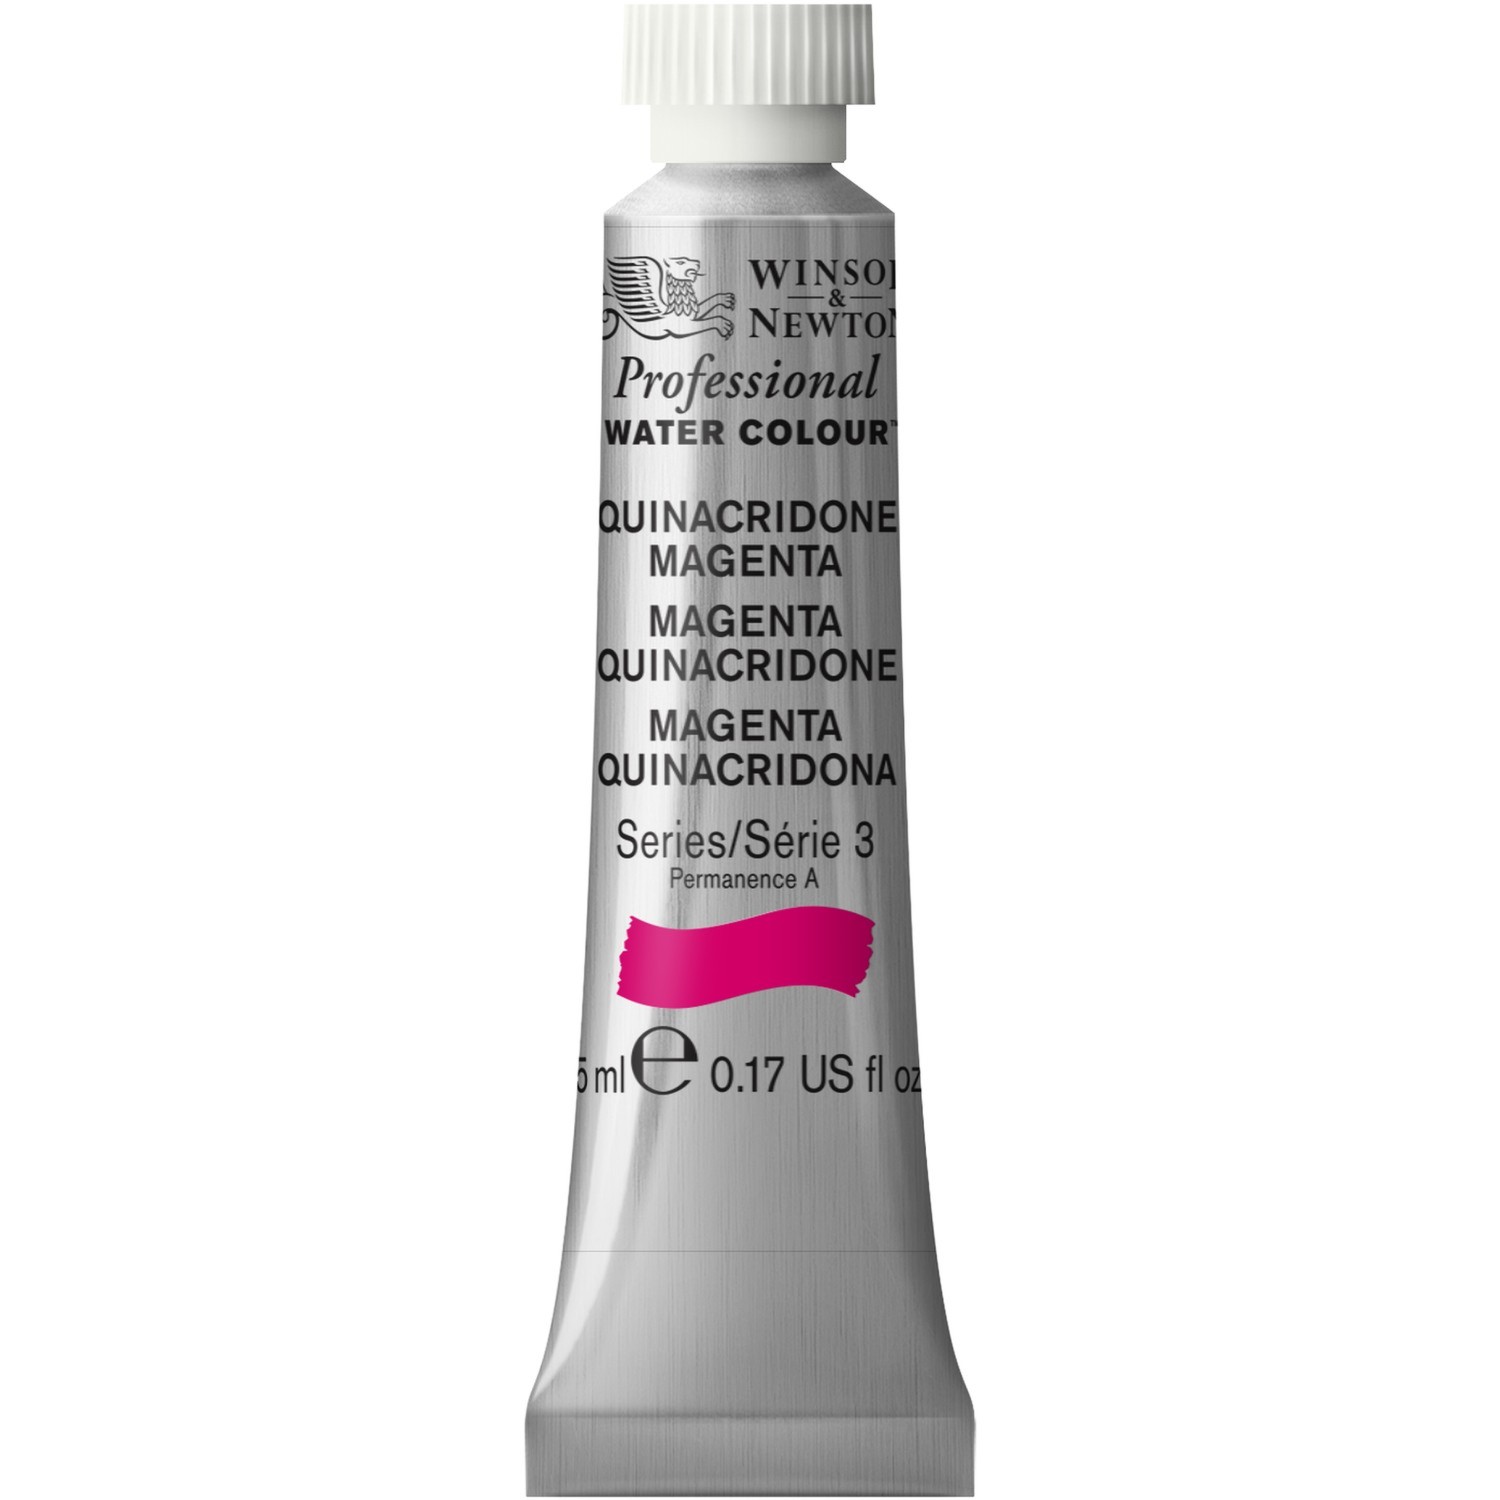 Winsor and Newton Quinac Magenta Professional Watercolour Paint 5ml Image 1